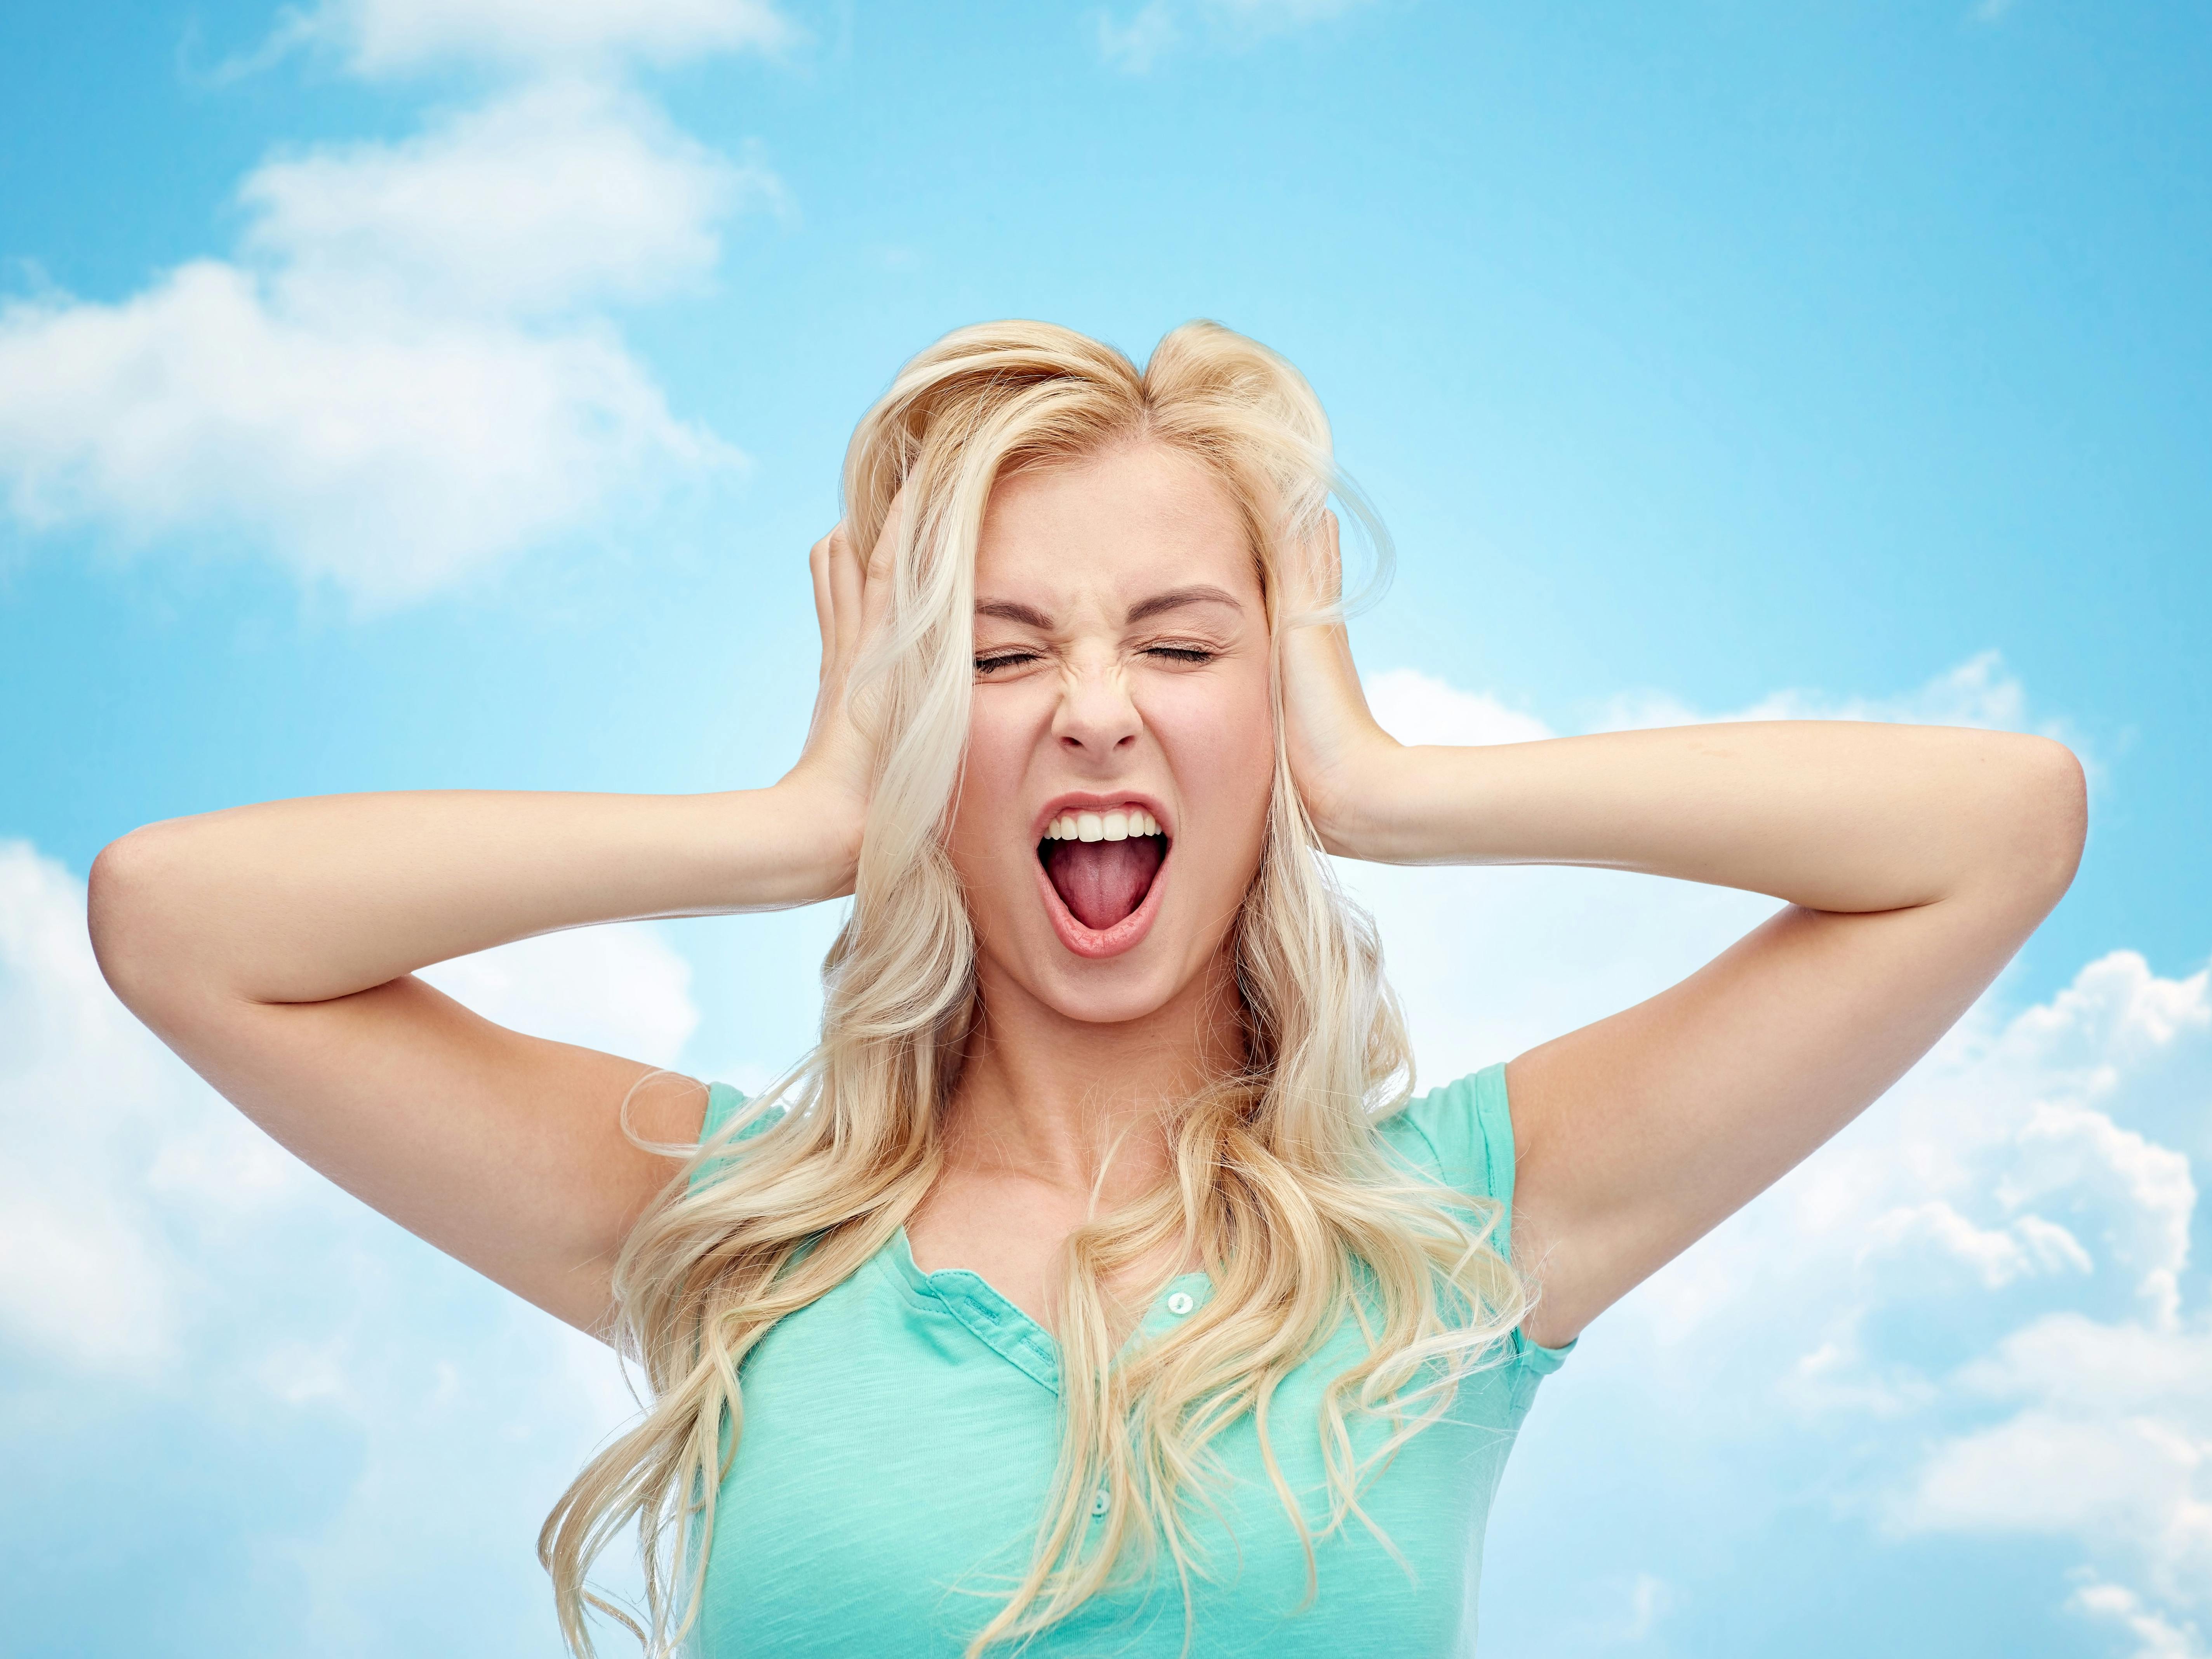 emotions, expressions, stress and people concept - young woman holding to her head and screaming over blue sky and clouds background
